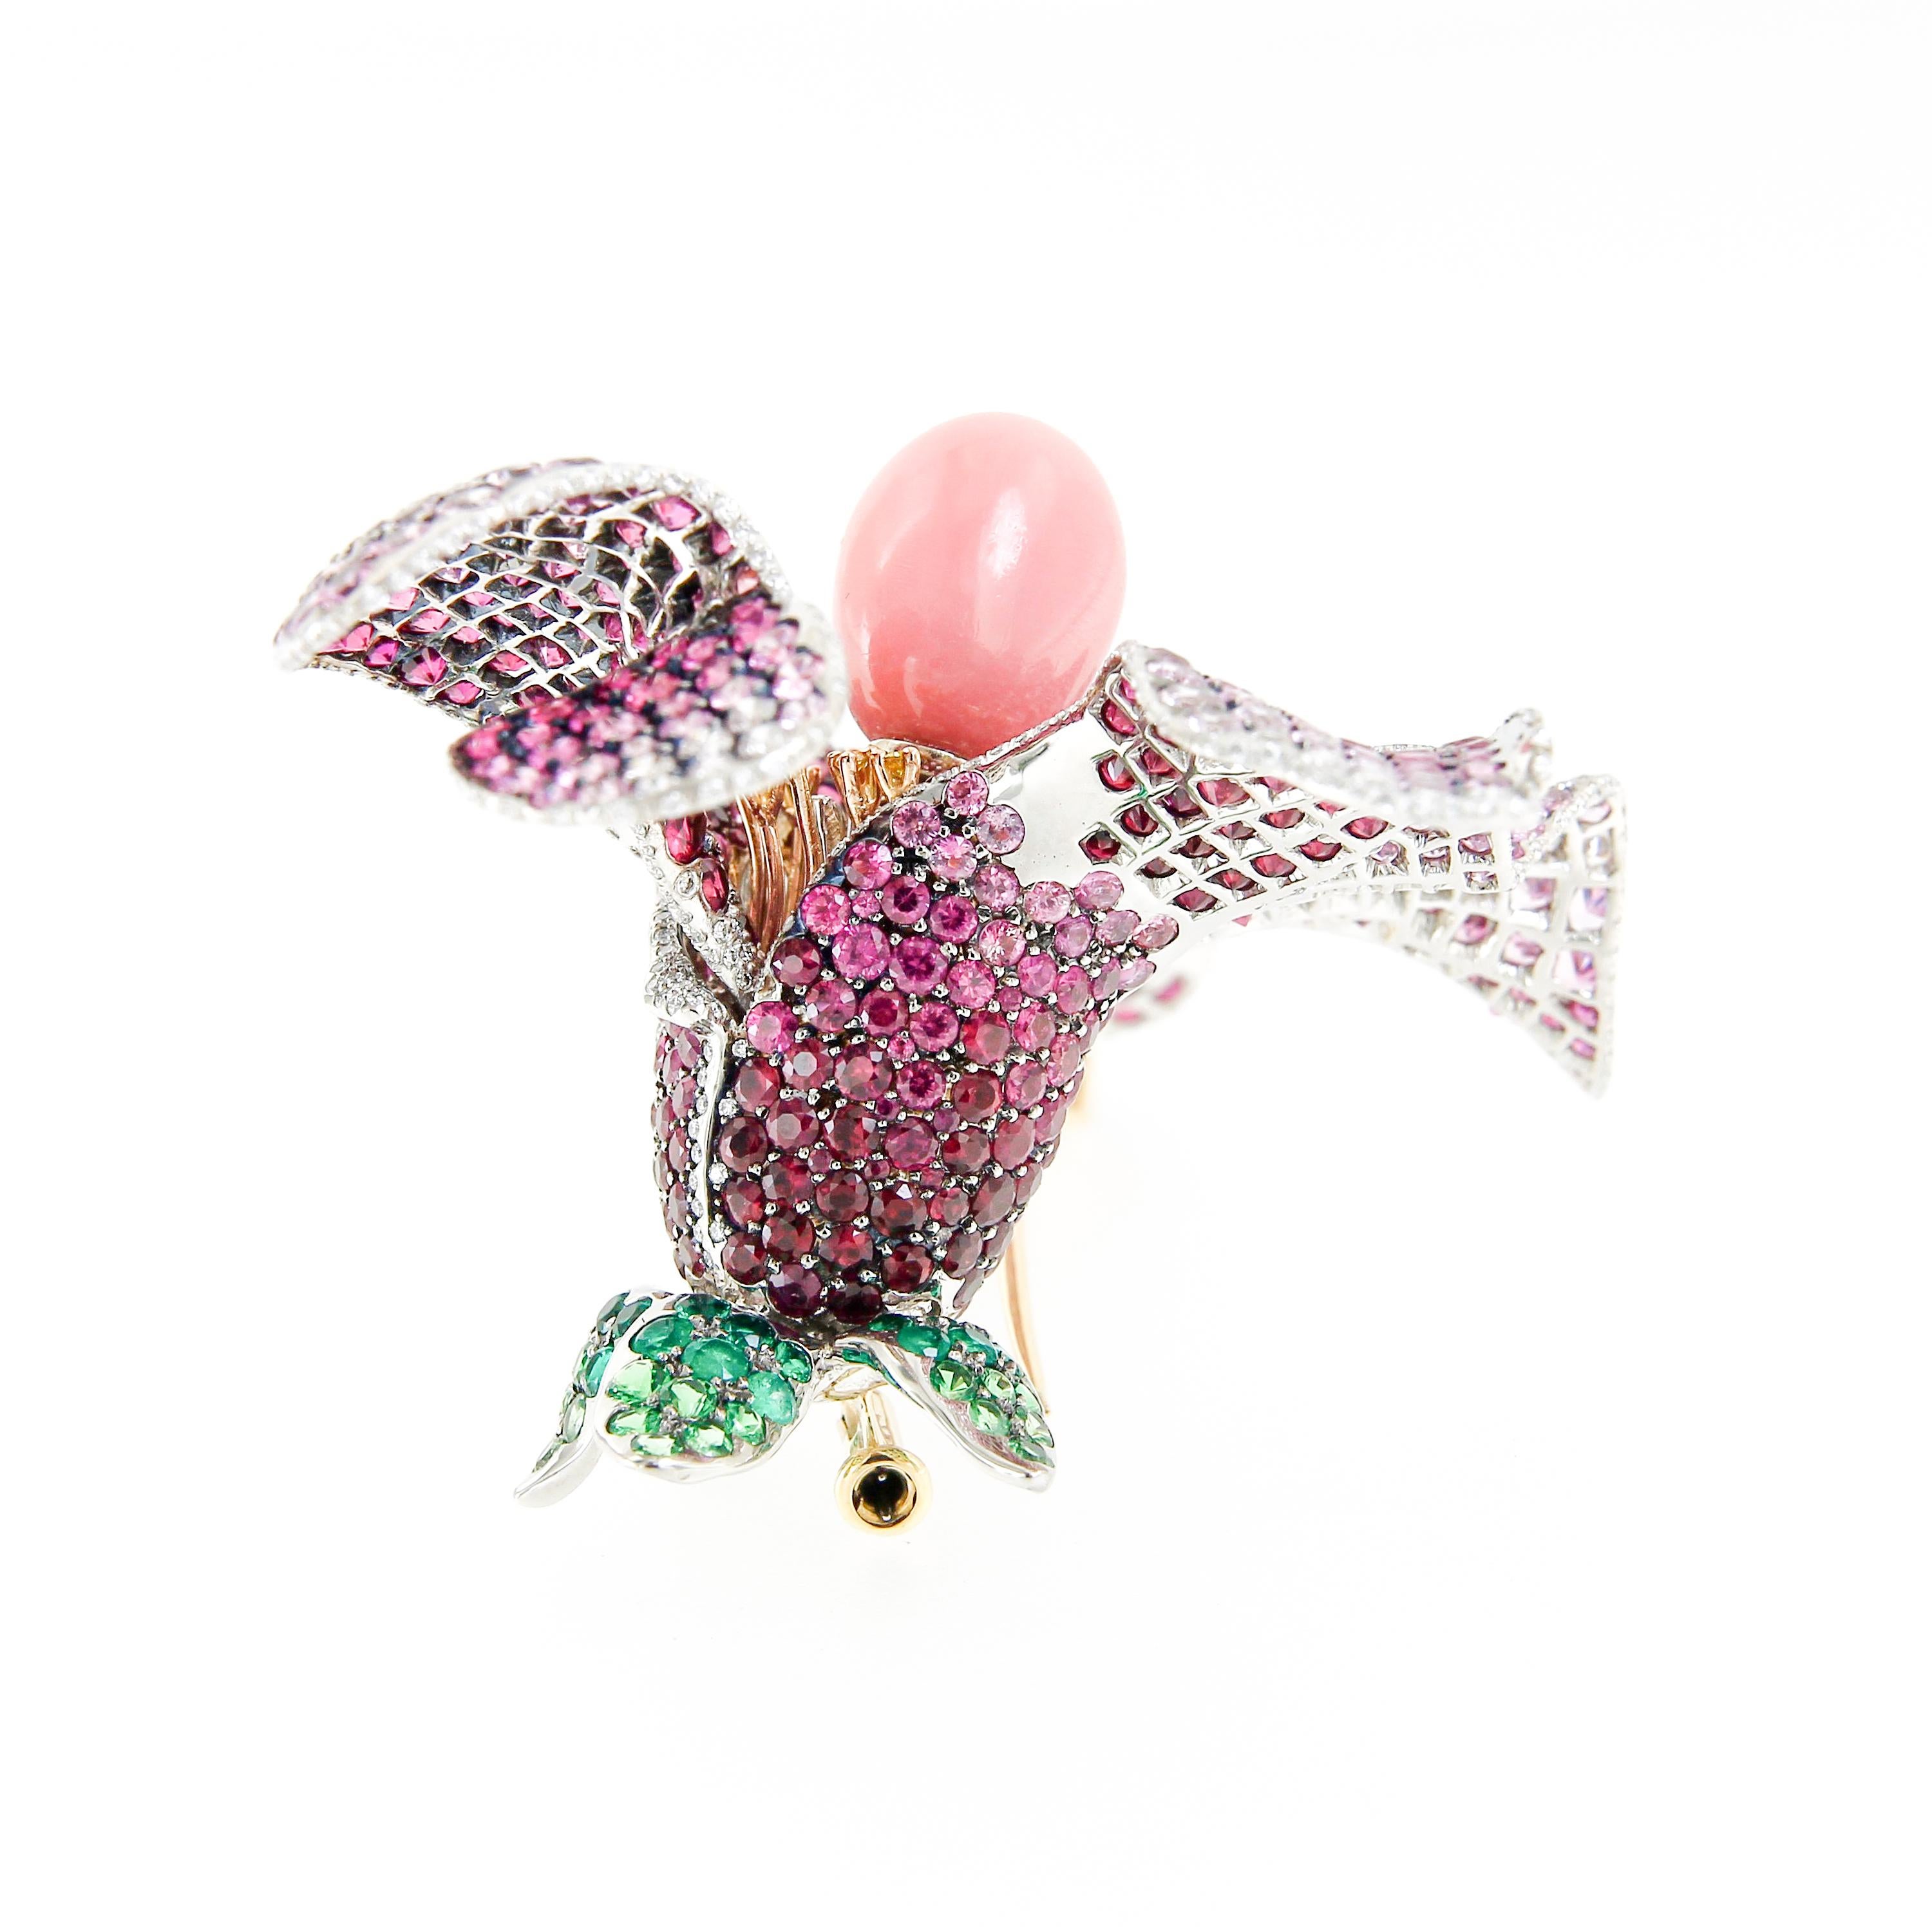 AENEA GIA Cert. 7.75ct. Conch Pearl 18k Gold Rubies Diamonds Trembling Brooch For Sale 5